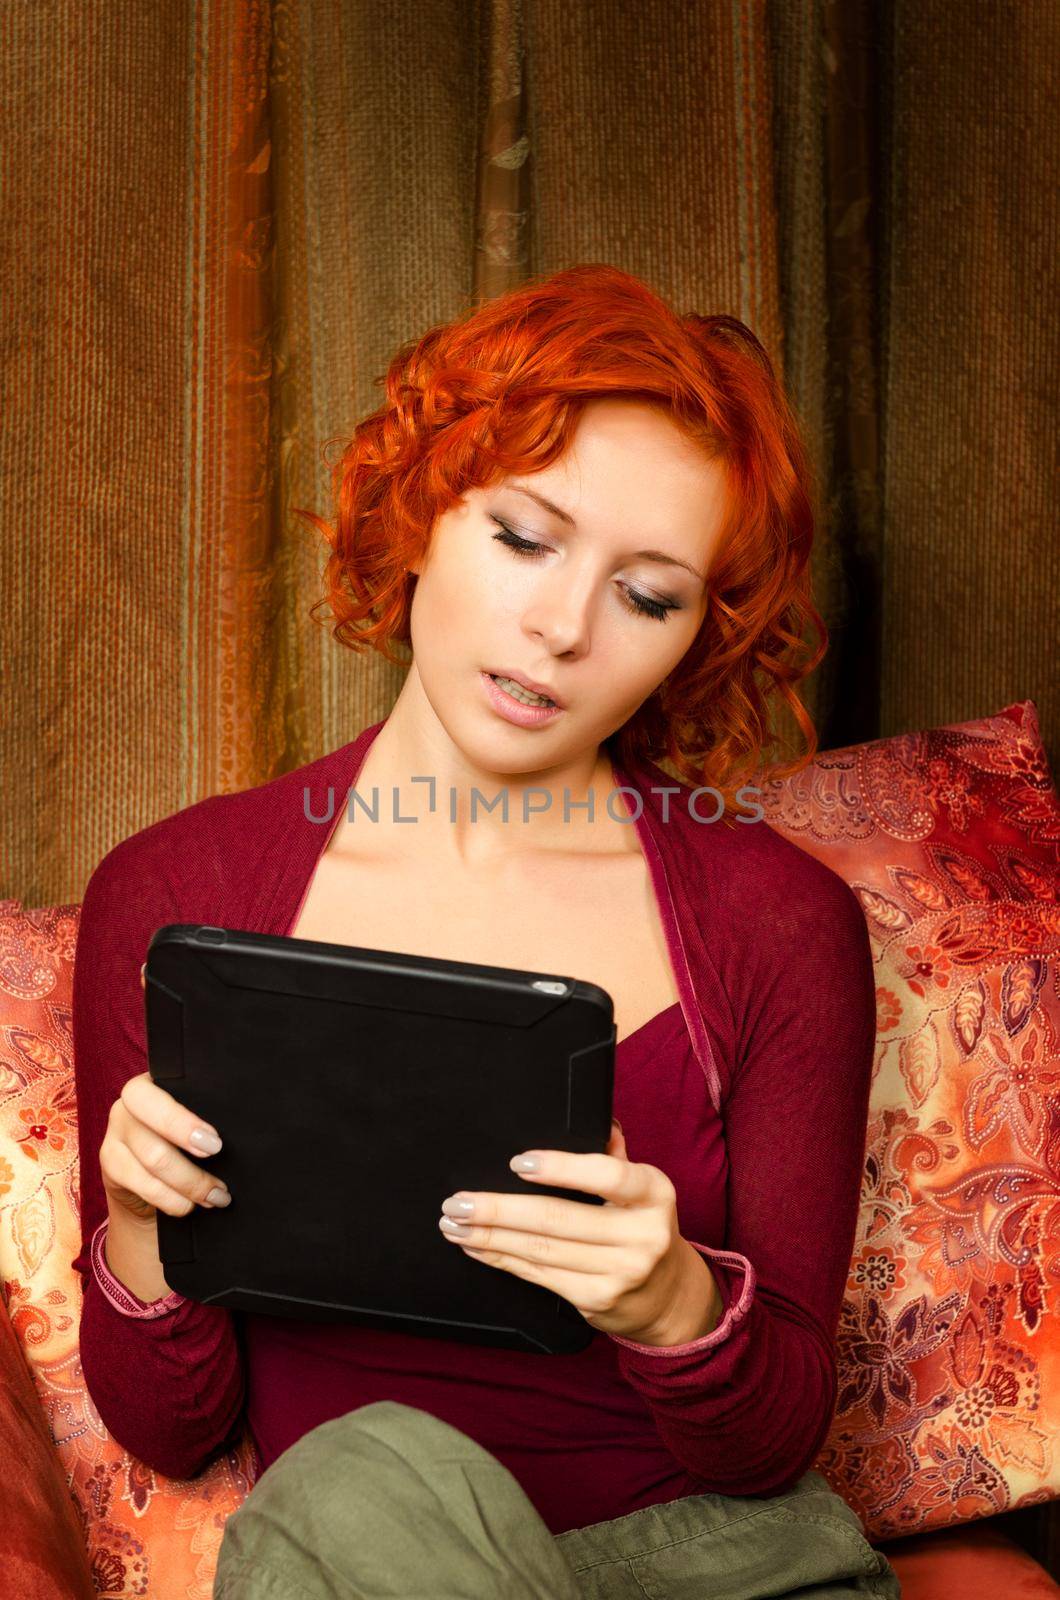 Young woman on a couch interacting with tablet pc or e-reader